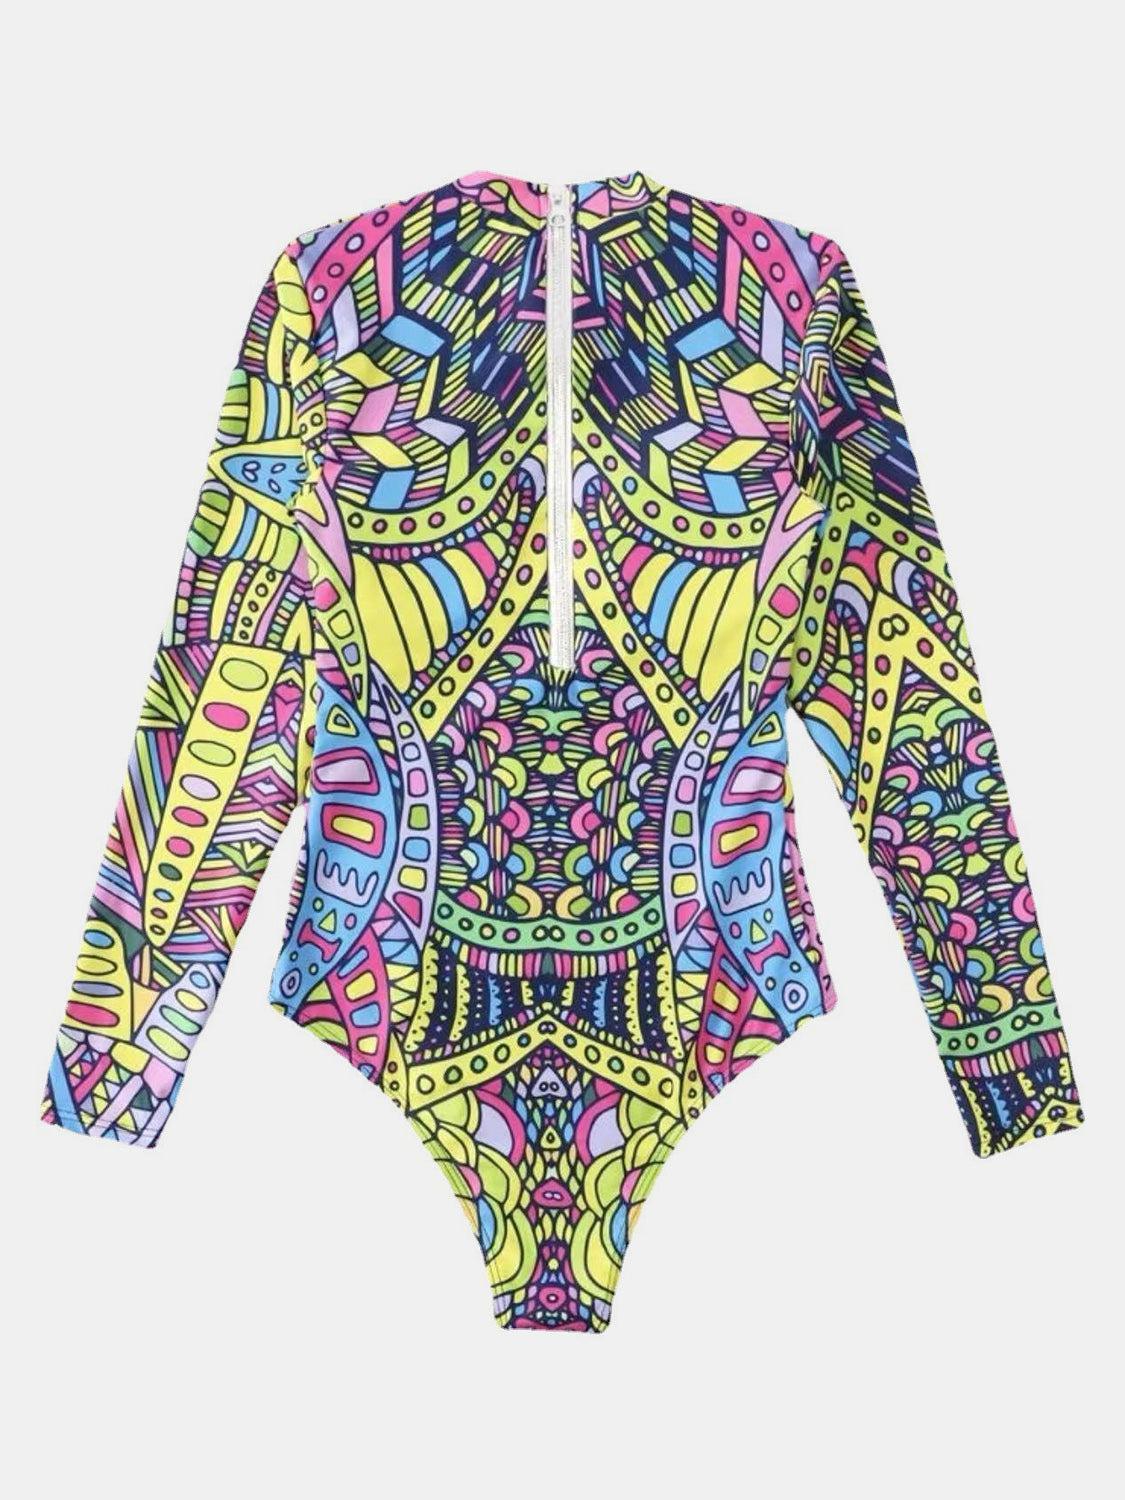 a bodysuit with a colorful pattern on it